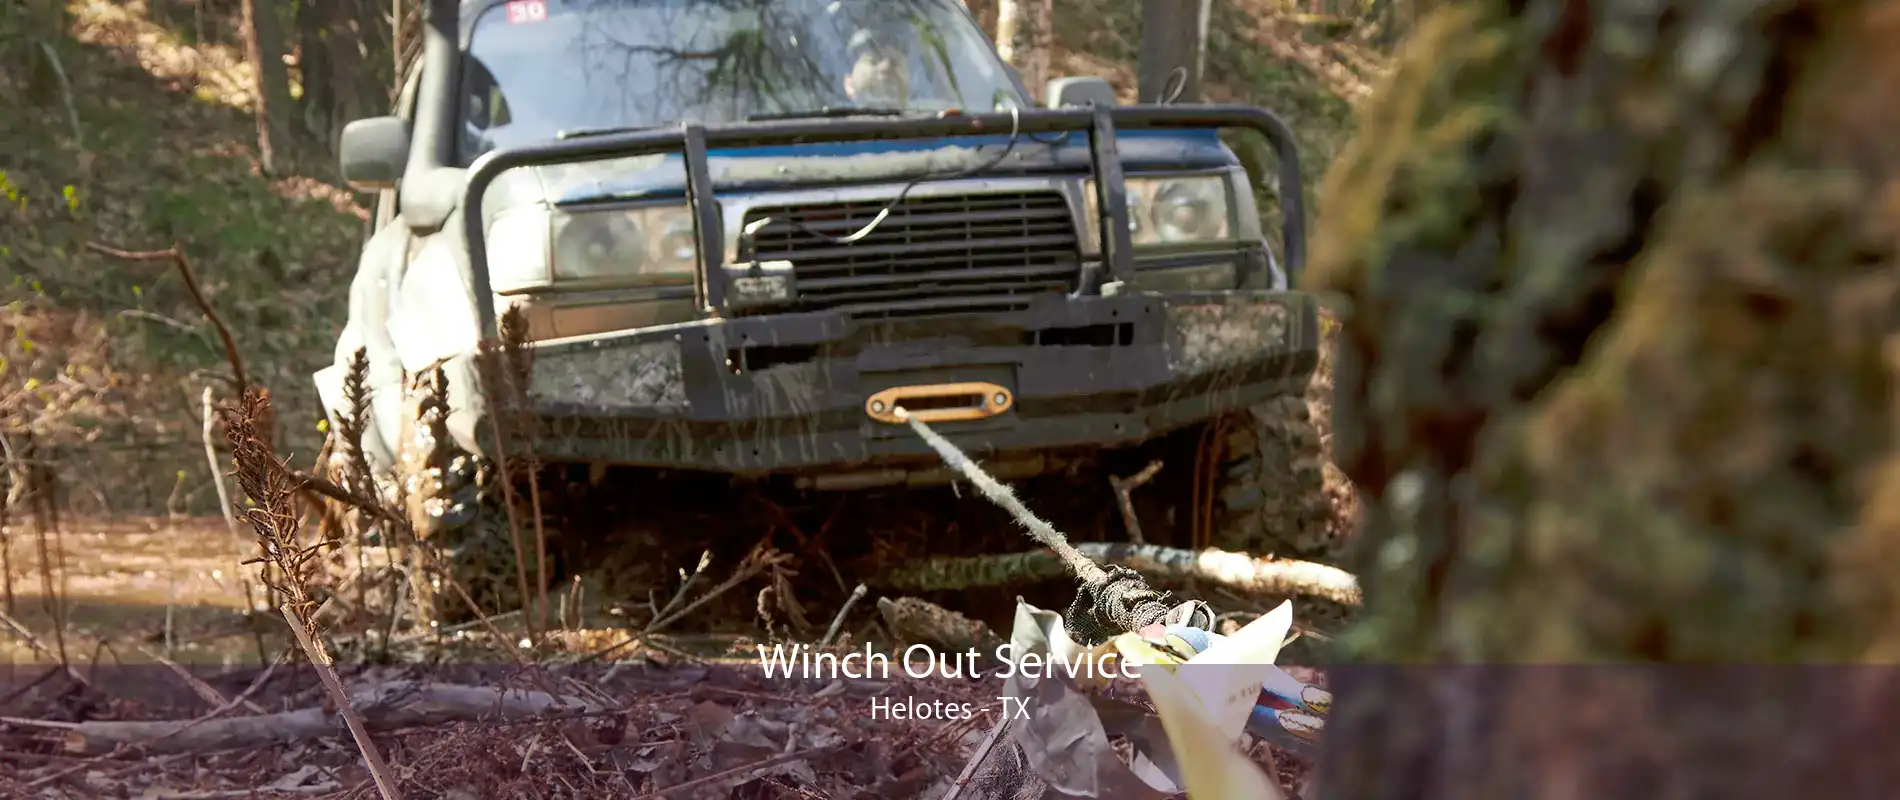 Winch Out Service Helotes - TX